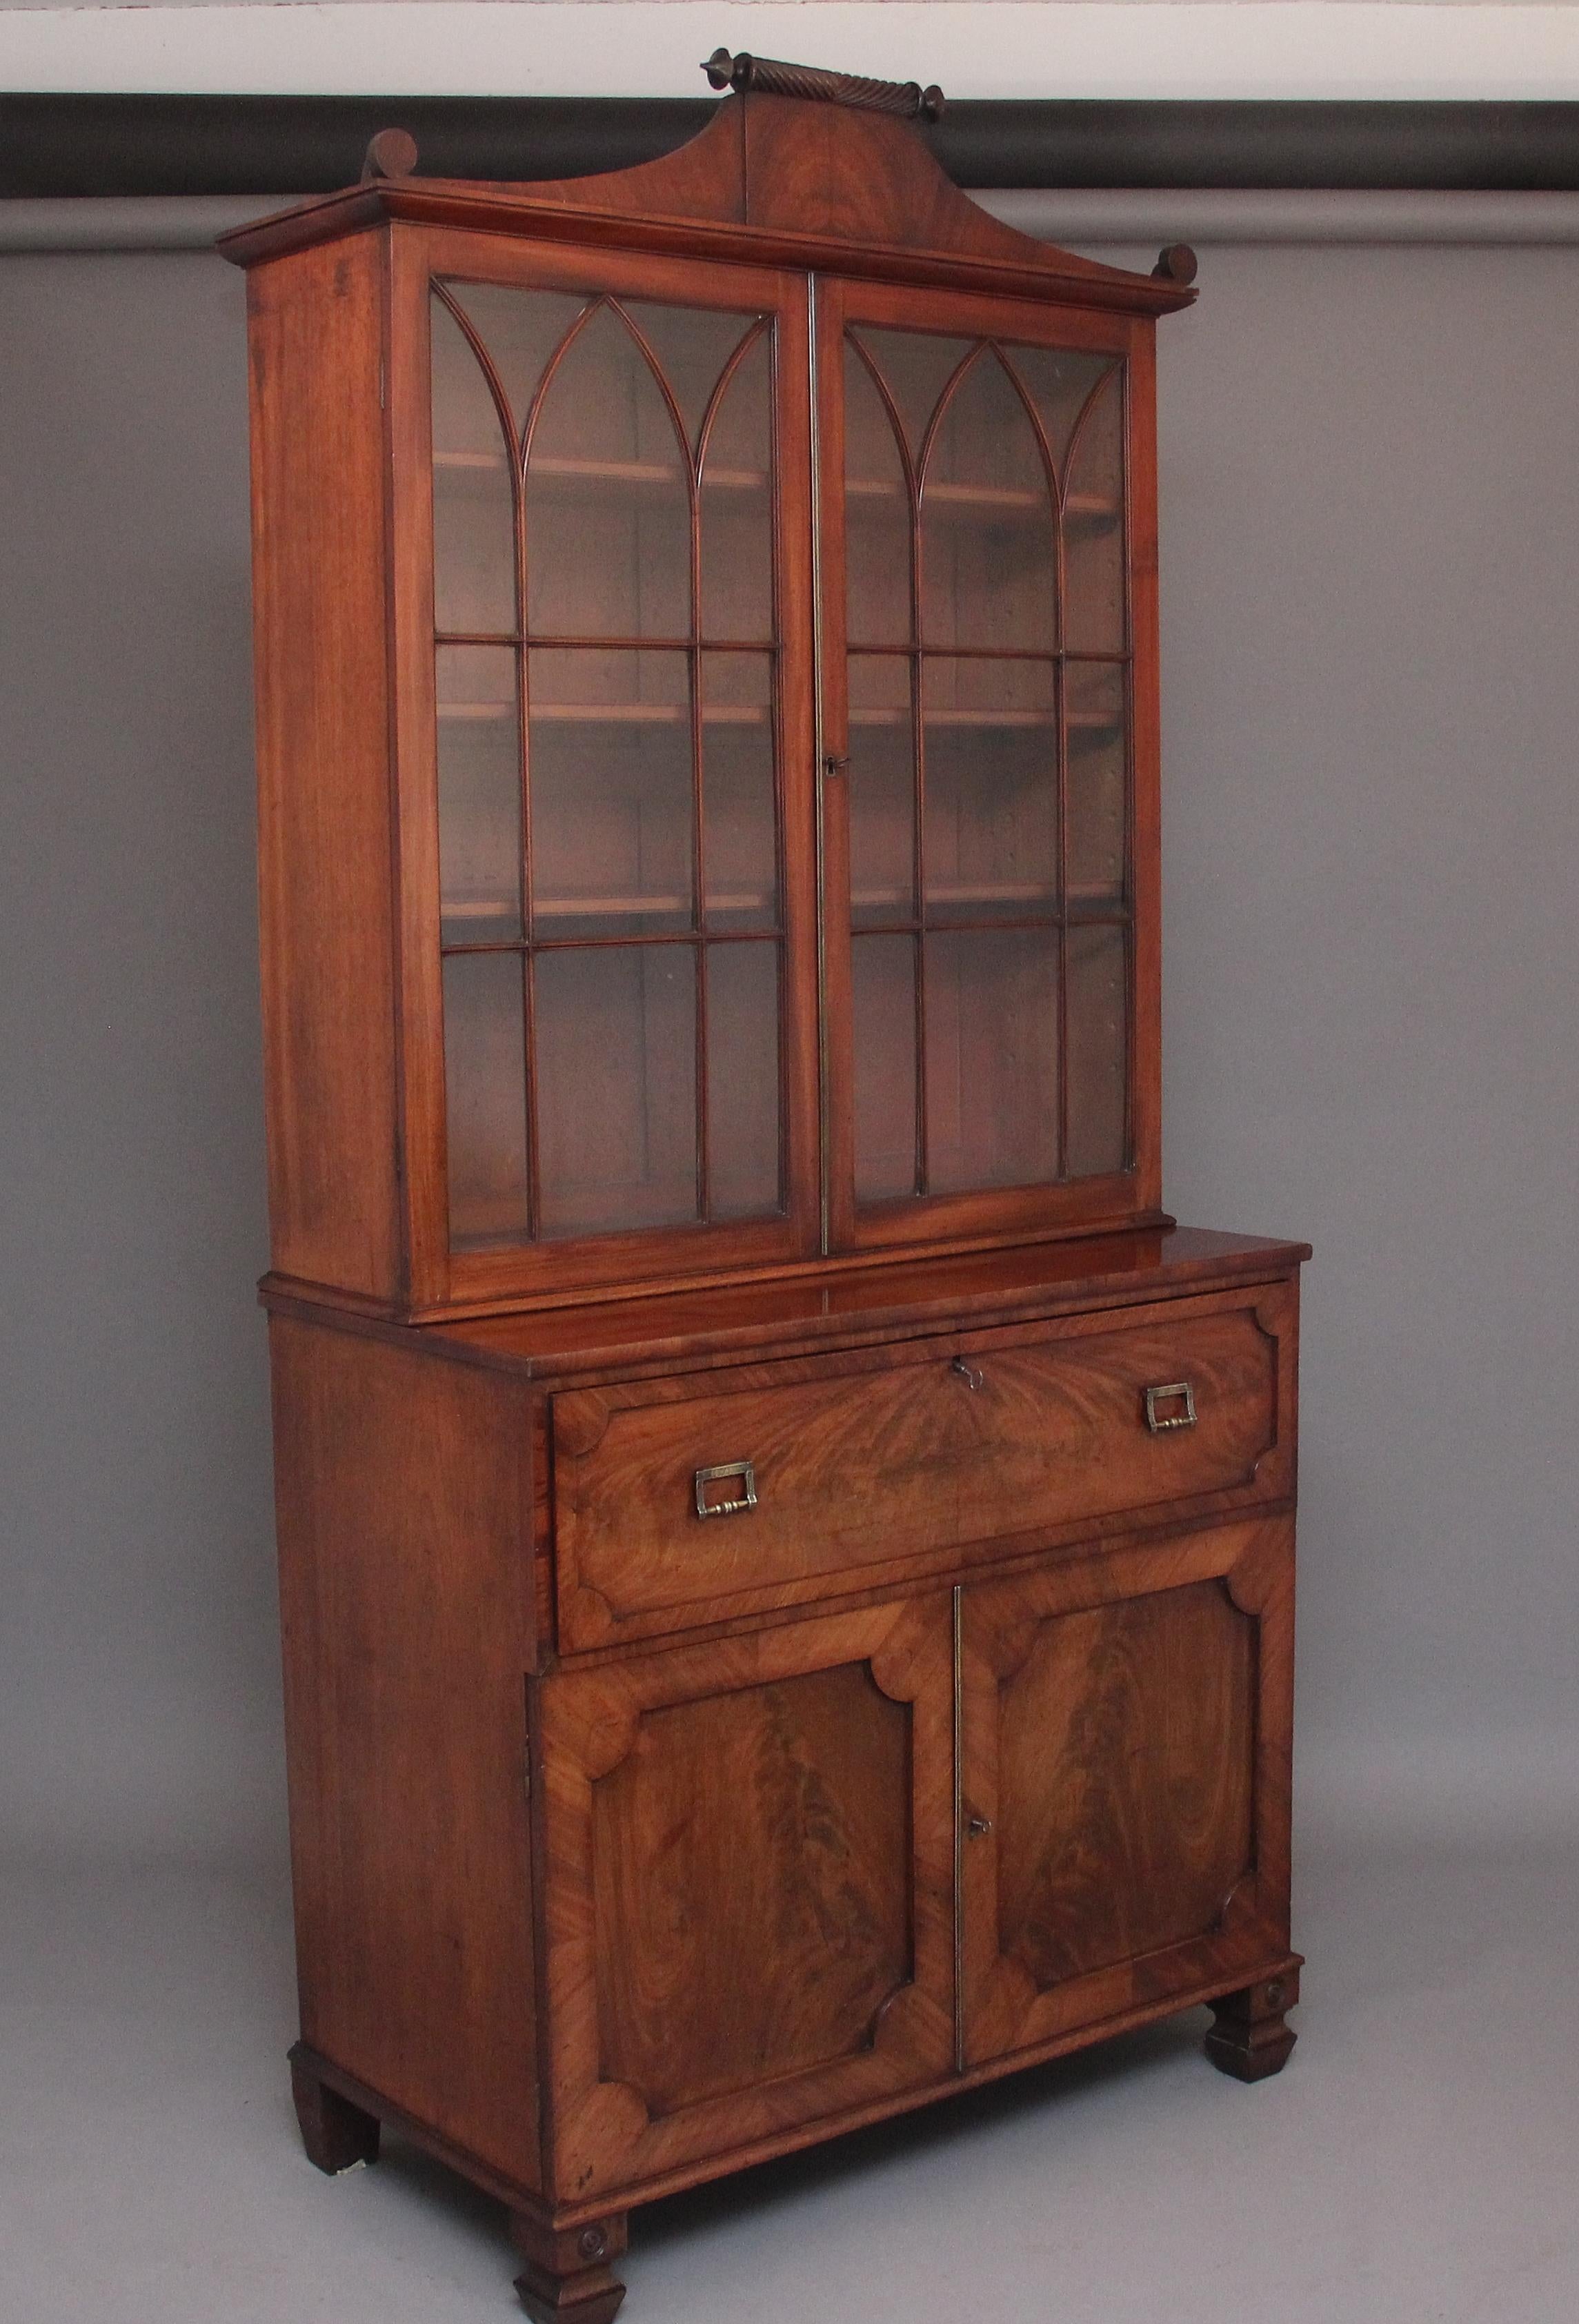 Early 19th Century Flame Mahogany Secretaire Bookcase In Good Condition For Sale In Martlesham, GB